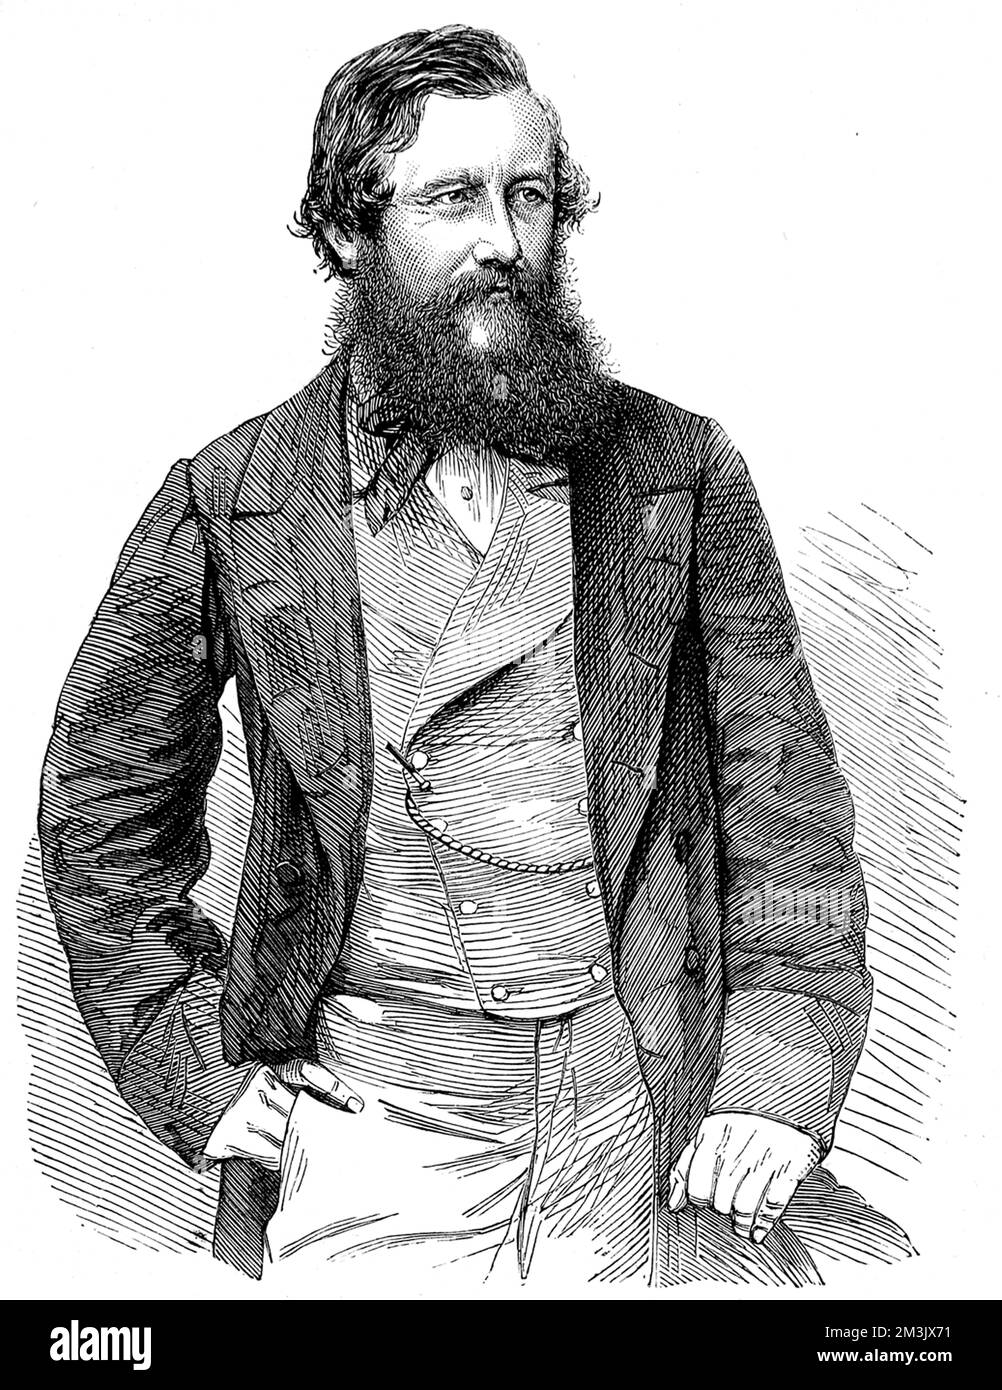 Captain John Hanning Speke (1827 - 1864), English explorer, pictured in 1863.  Between 1860 and 1863 Speke and James Augustus Grant led an expedition to find the source of the Nile; finally proving, once and for all, that the Victoria Nyanza was the source of the river.     Date: 1863 Stock Photo